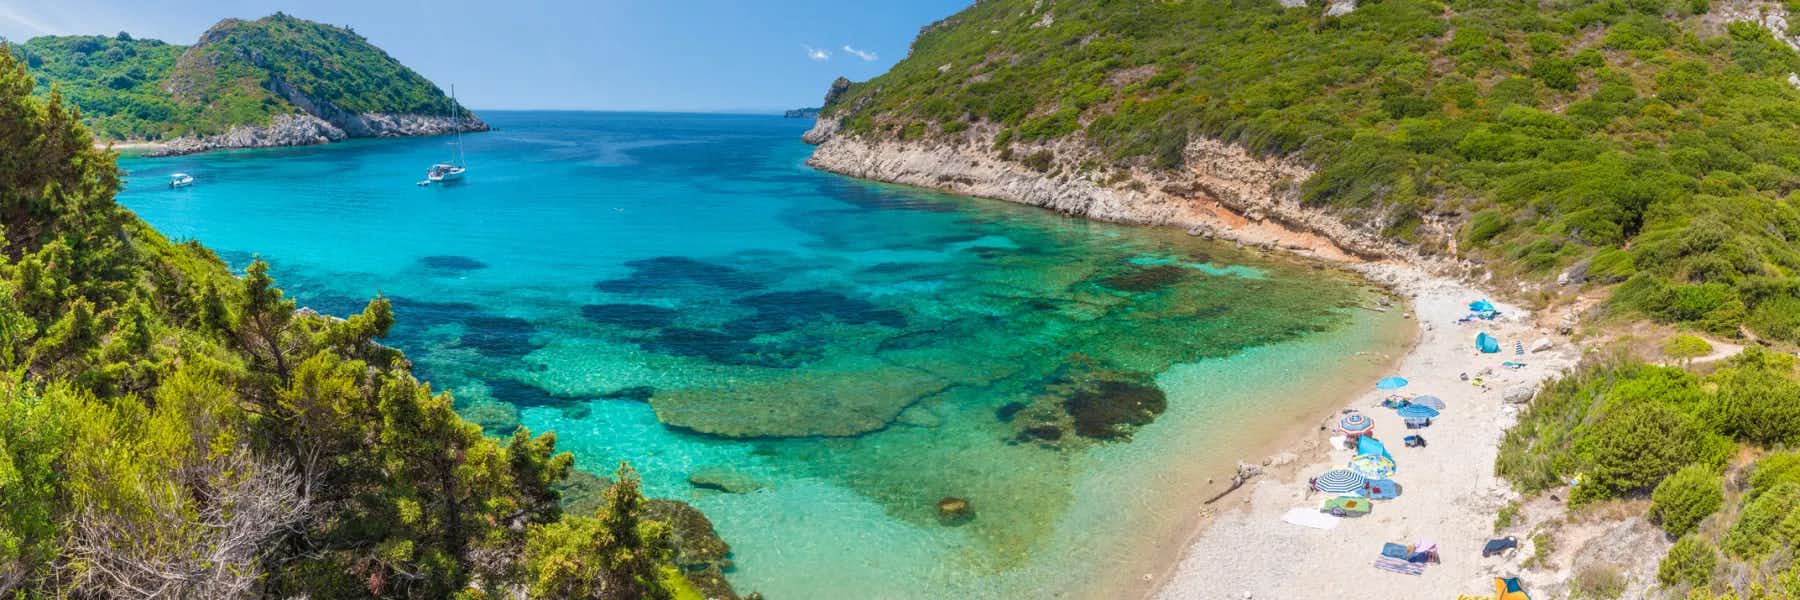 Best Greek Islands: Four Greek Islands You Can Live On All Year-Round